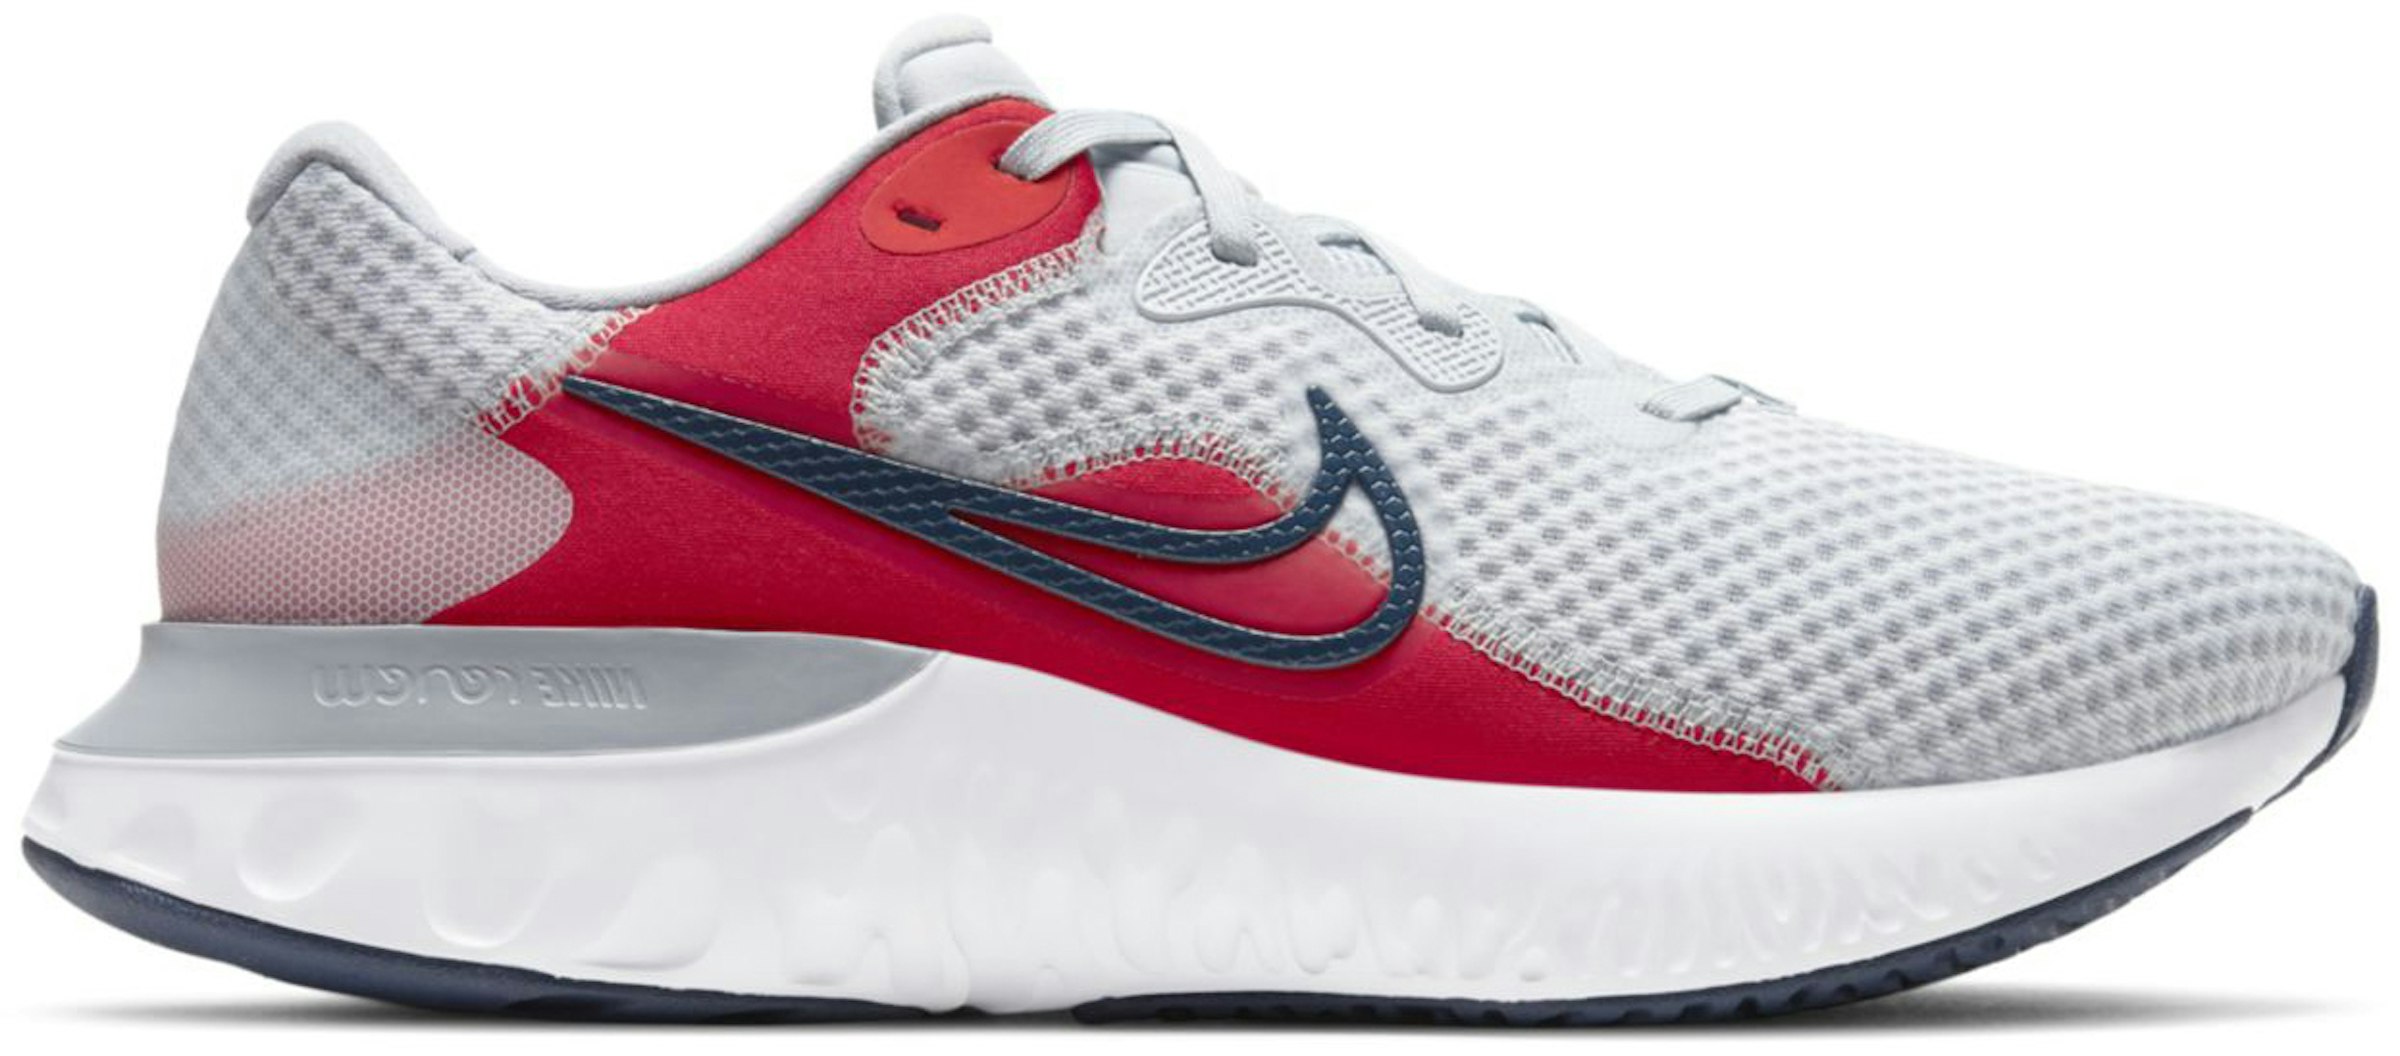 Nike Renew 2 Pure Chile Red - CU3504-008 - US